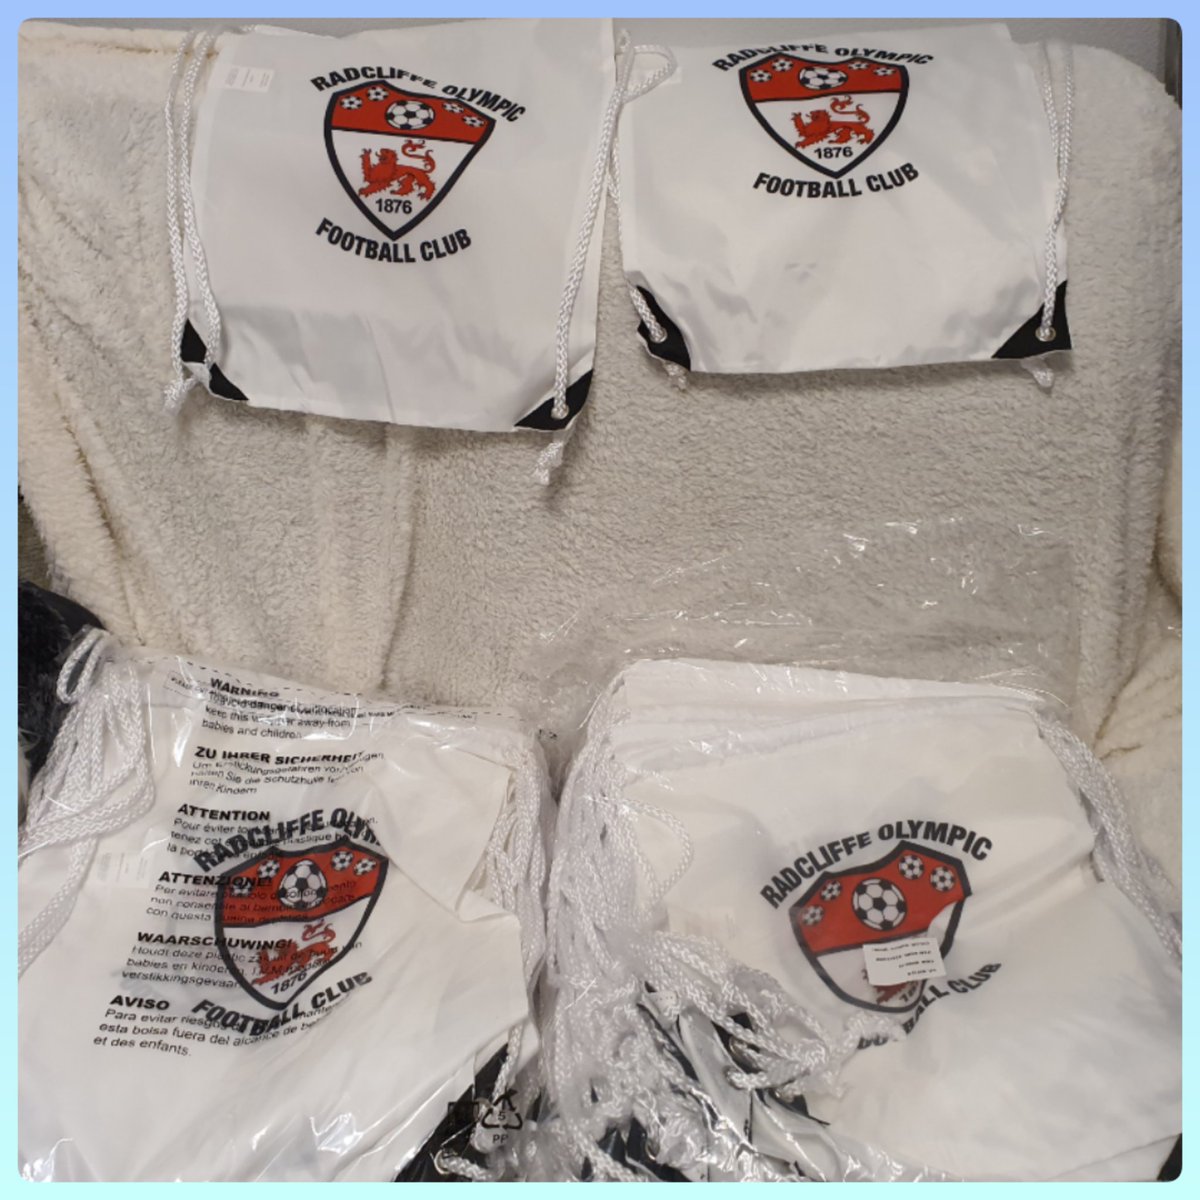 Did you know we specialise in custom drawstring printing for businesses and clubs?  It's not just a bag – it's a walking billboard for your brand! Let's make your logo stand out.

 #BrandPromotion #CustomDrawstrings #YourBusinessYourWay #CraftBizParty  #MHHSBD